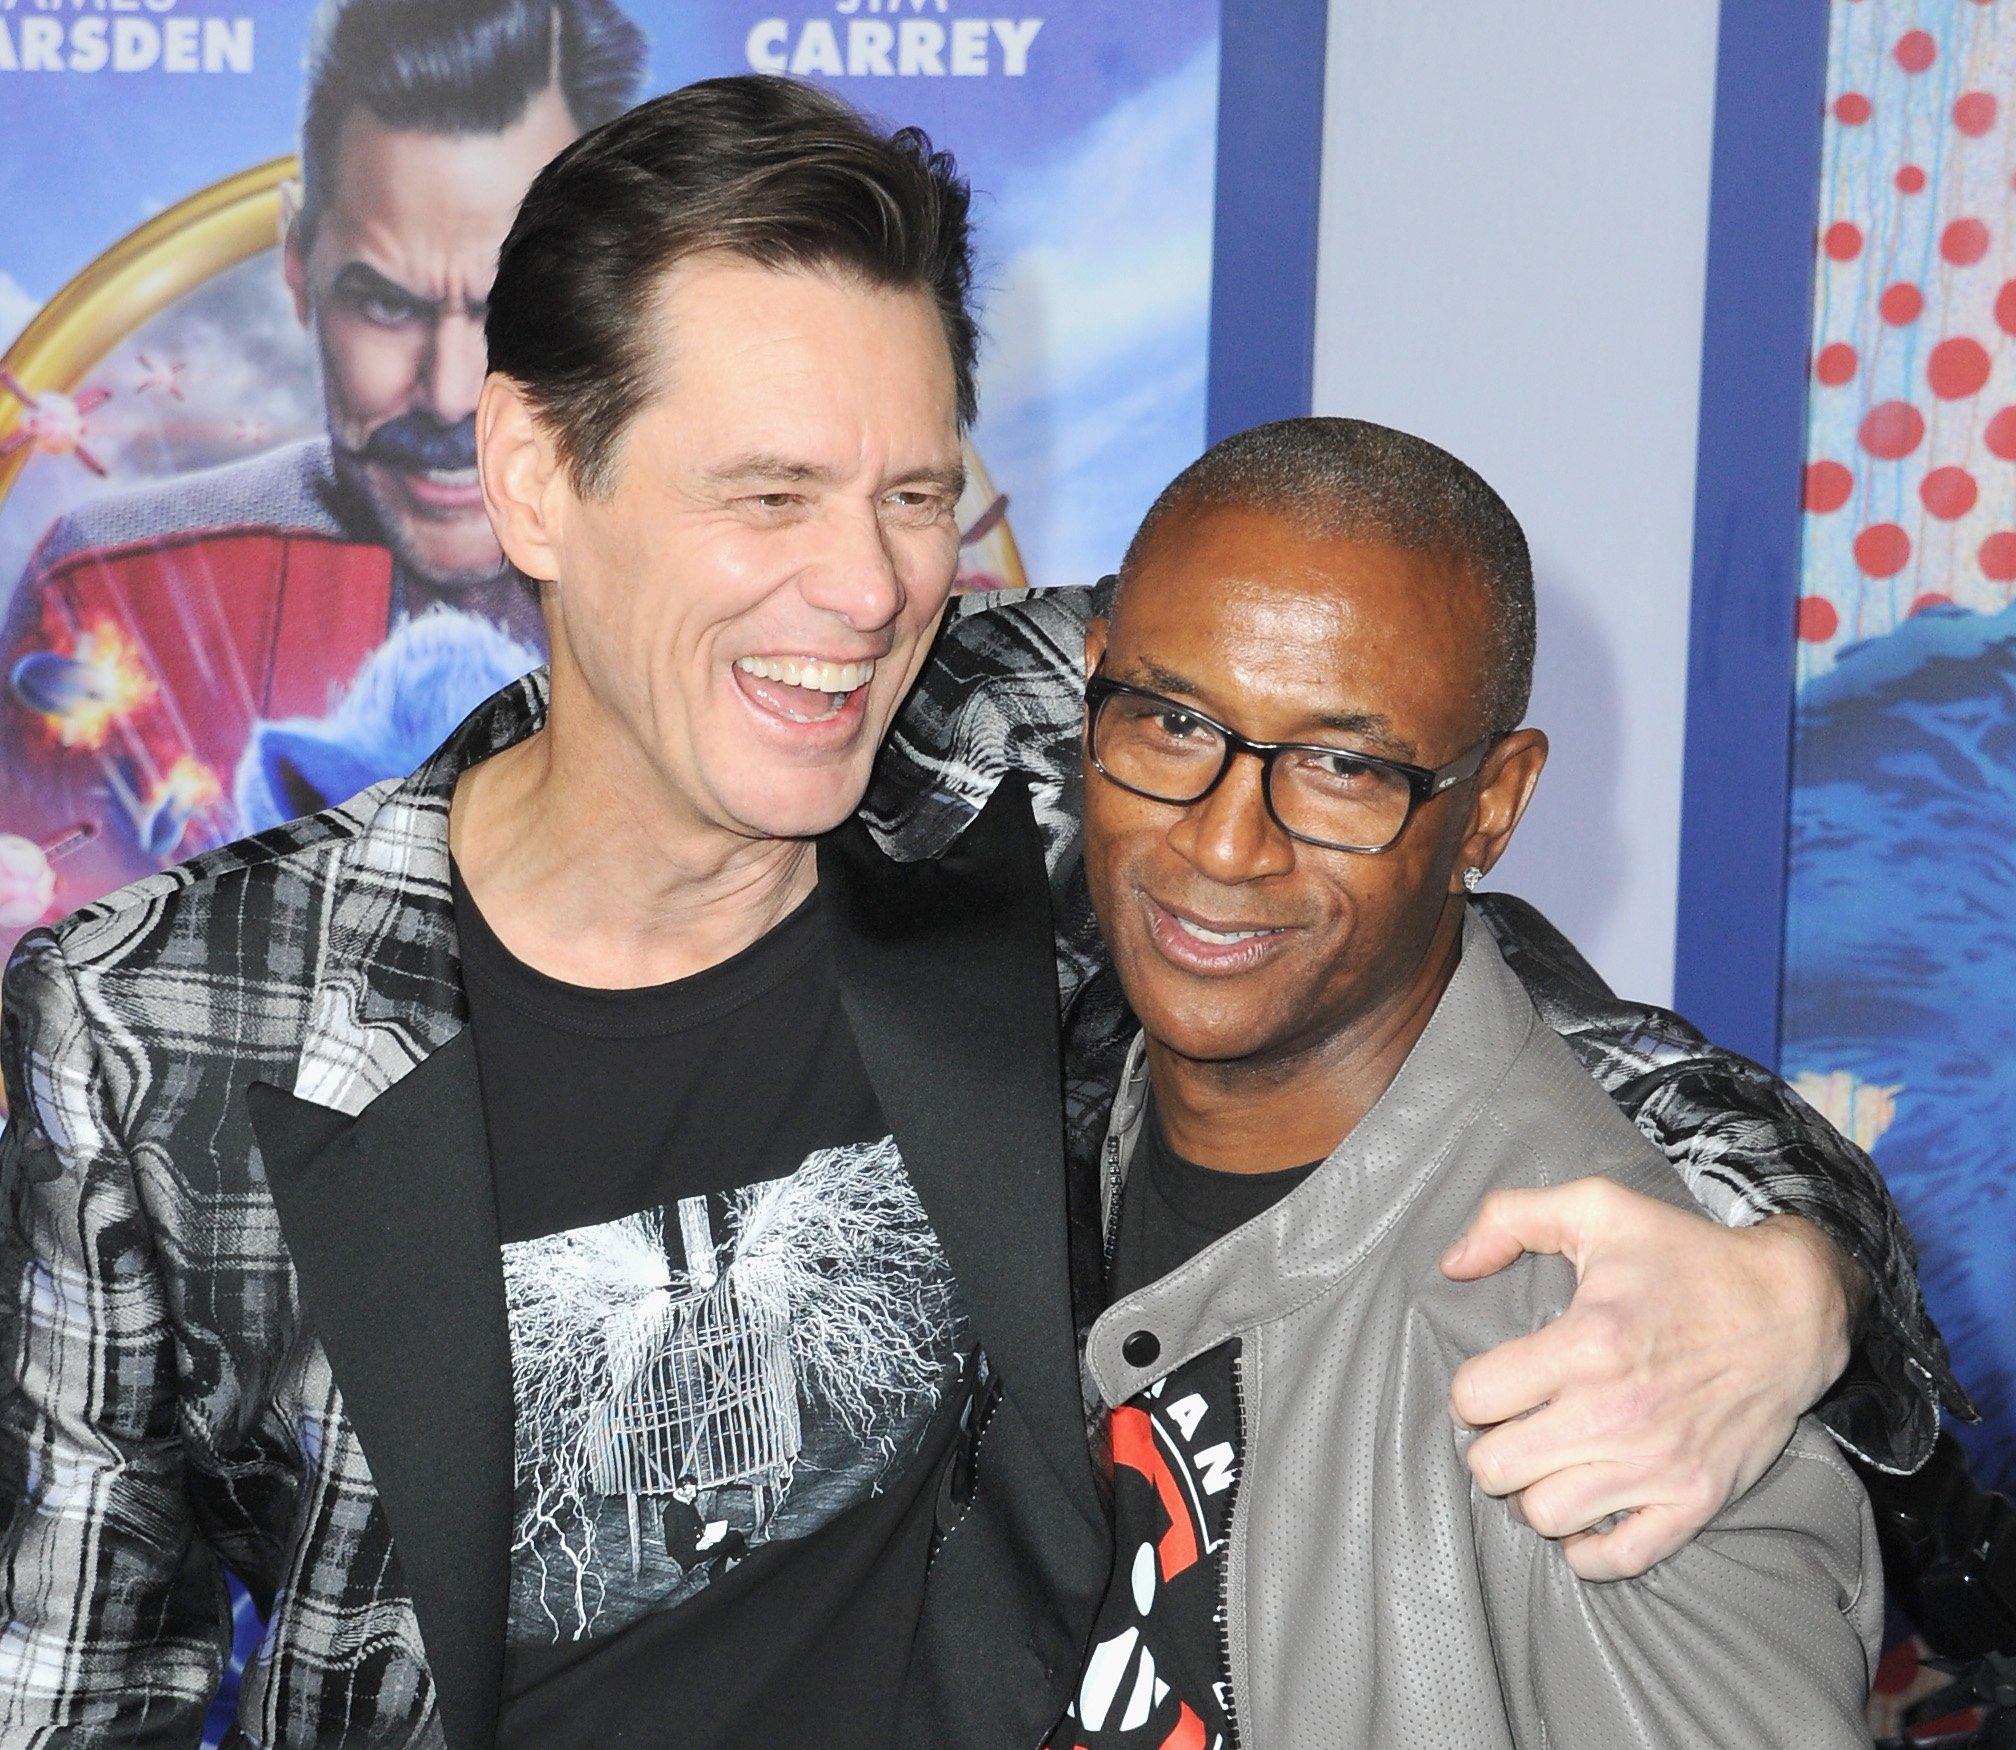 Jim Carrey and Tommy Davidson attend the LA Special Screening Of Paramount's "Sonic The Hedgehog" held at Regency Village Theatre on February 12, 2020 in Westwood, California. | Source: Getty Images